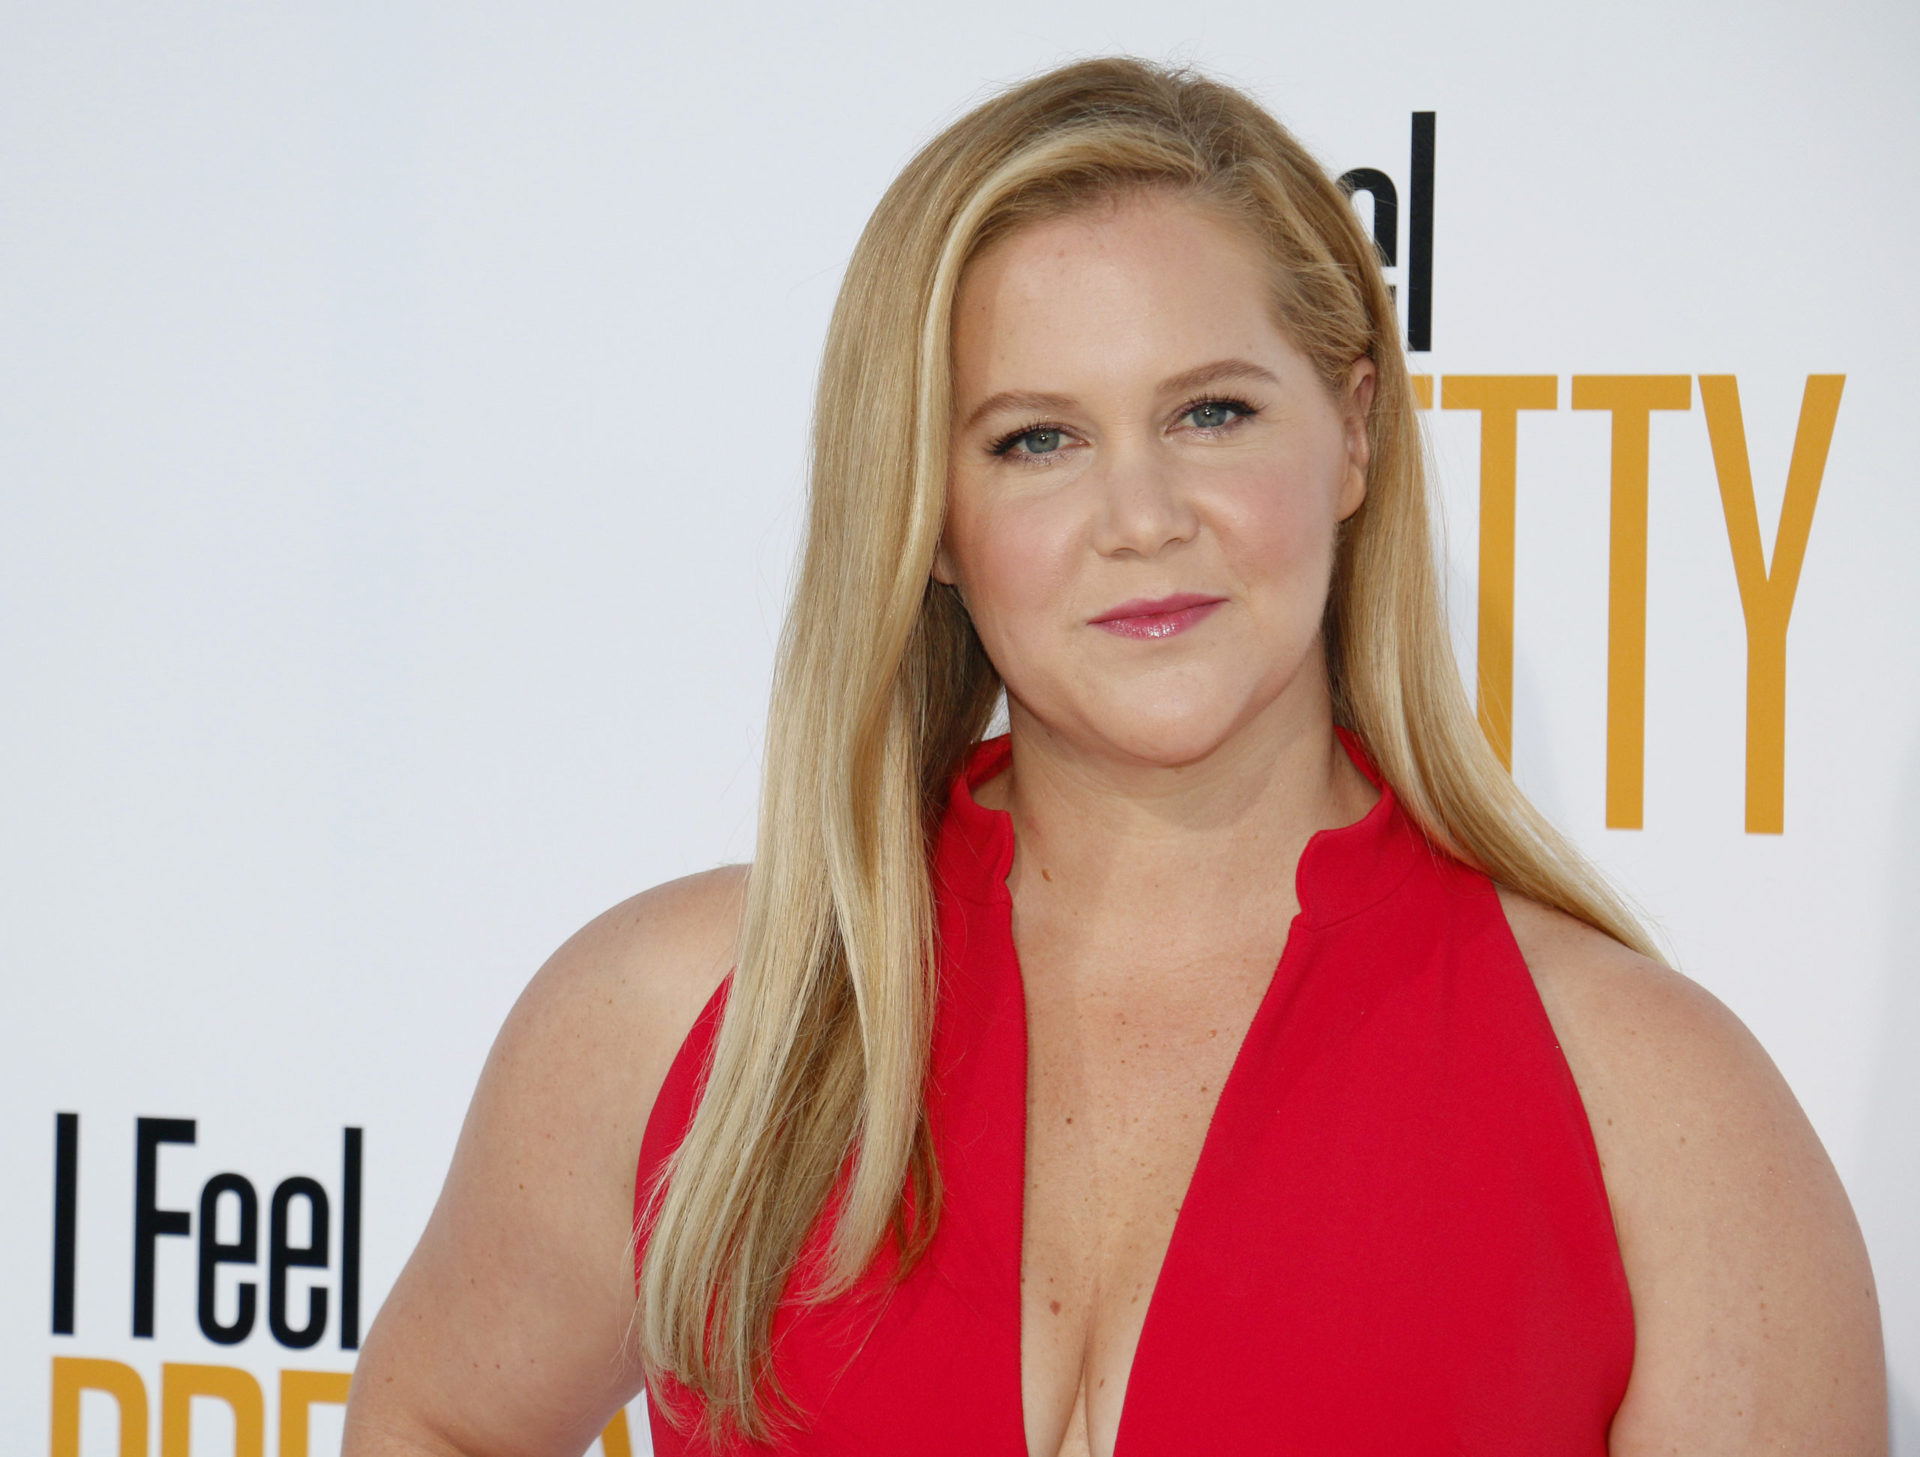 Comedian Amy Schumer On Her Pregnancy Breastfeeding And Losing Weight After Giving Birth